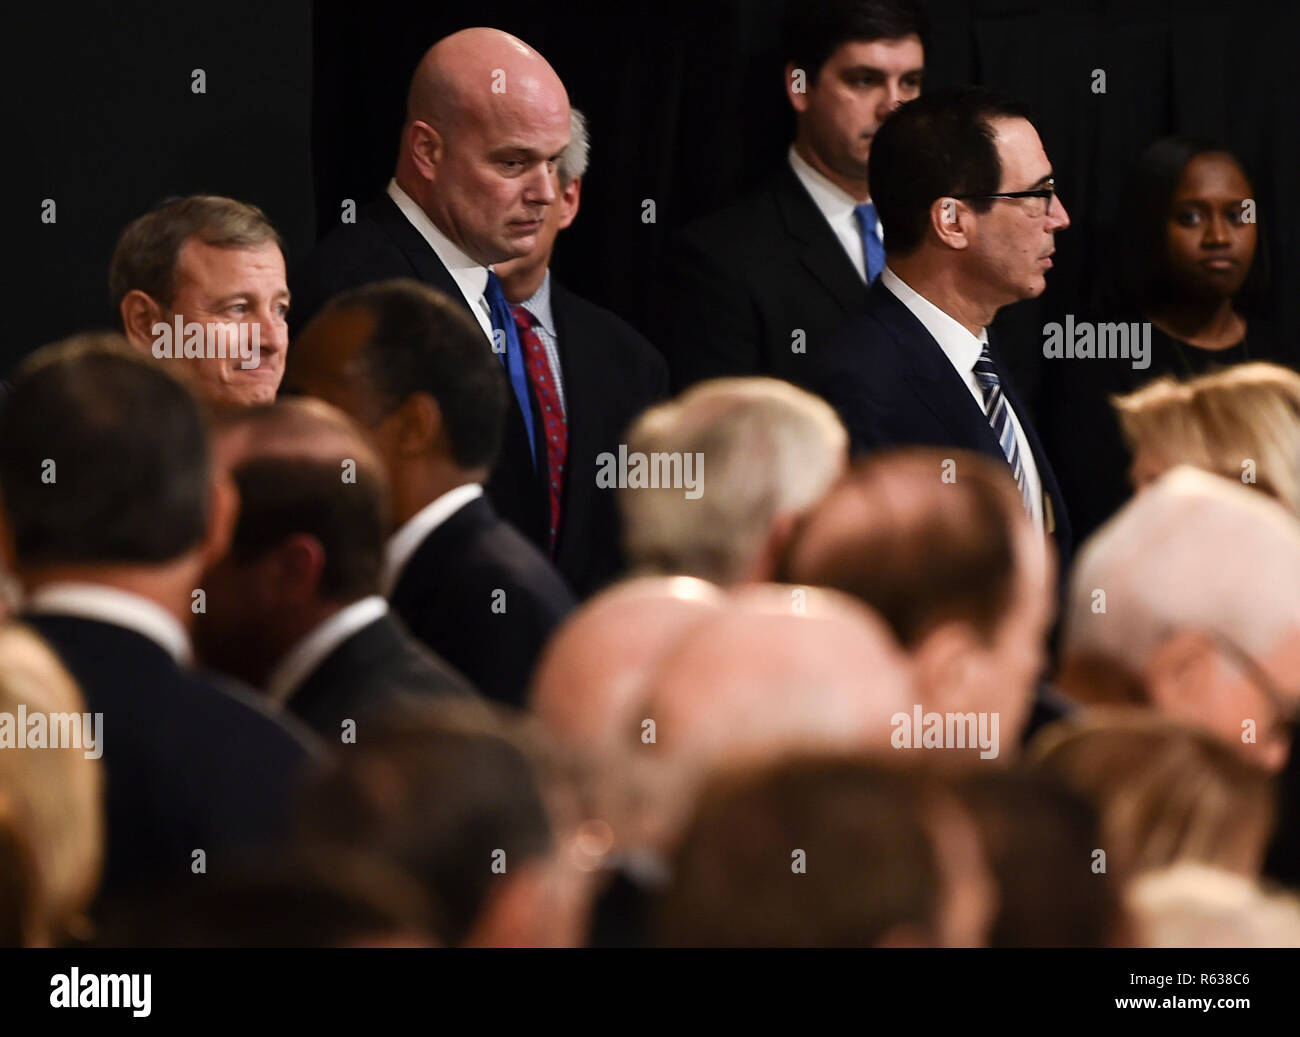 Member of the Supreme Court Chief Justice, John Roberts (L), acting Attorney General, Matthew Whitaker (C), and Secretary of the Treasury, Steven Mnuchin (L) wait for the casket containing the remains of former US President George H.W. Bush to arrive at the US Capitol during a State Funeral in Washington, DC, December 3, 2018. - The body of the late former President George H.W. Bush will travel from Houston to Washington, where he will lie in state at the US Capitol through Wednesday morning. Bush, who died on November 30, will return to Houston for his funeral on Thursday. (Photo by Brendan Stock Photo